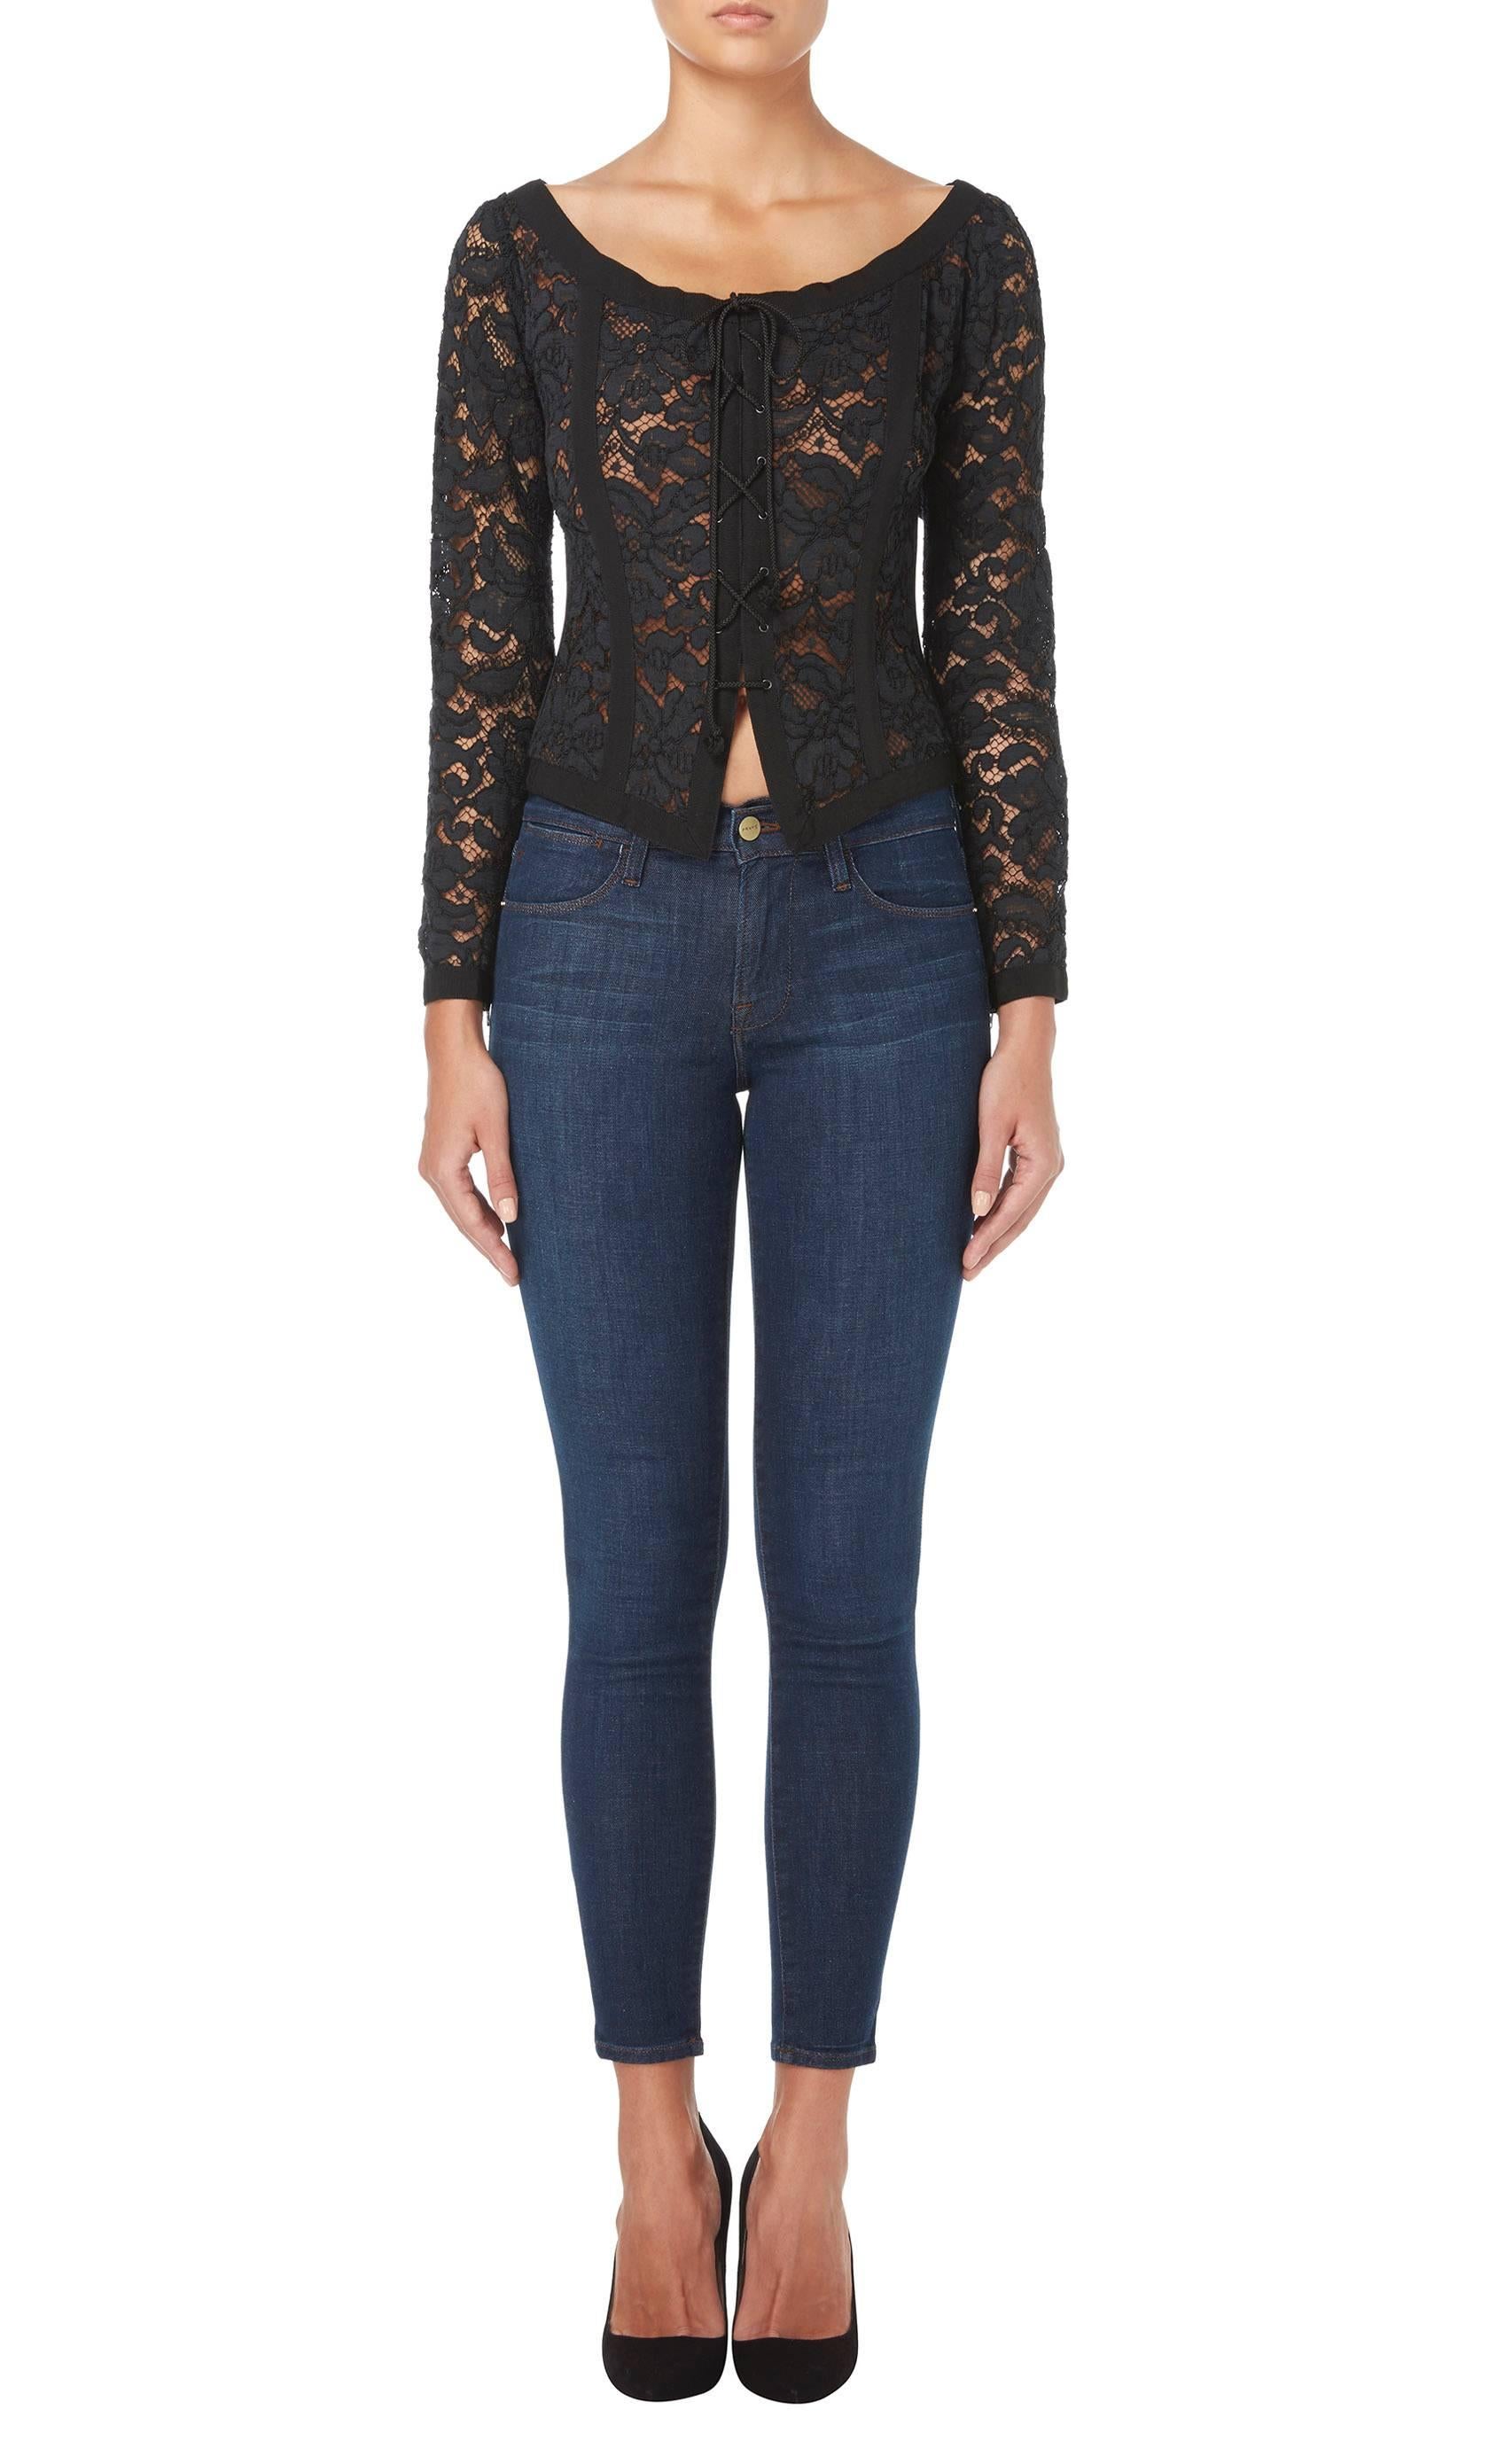 This Yves Saint Laurent bodice is an amazing piece of eveningwear, whether teamed with a pair of slim fitting trousers or a skirt. Constructed in sheer black lace with a nude lining in the body for opacity, the bodice features a flattering scooped